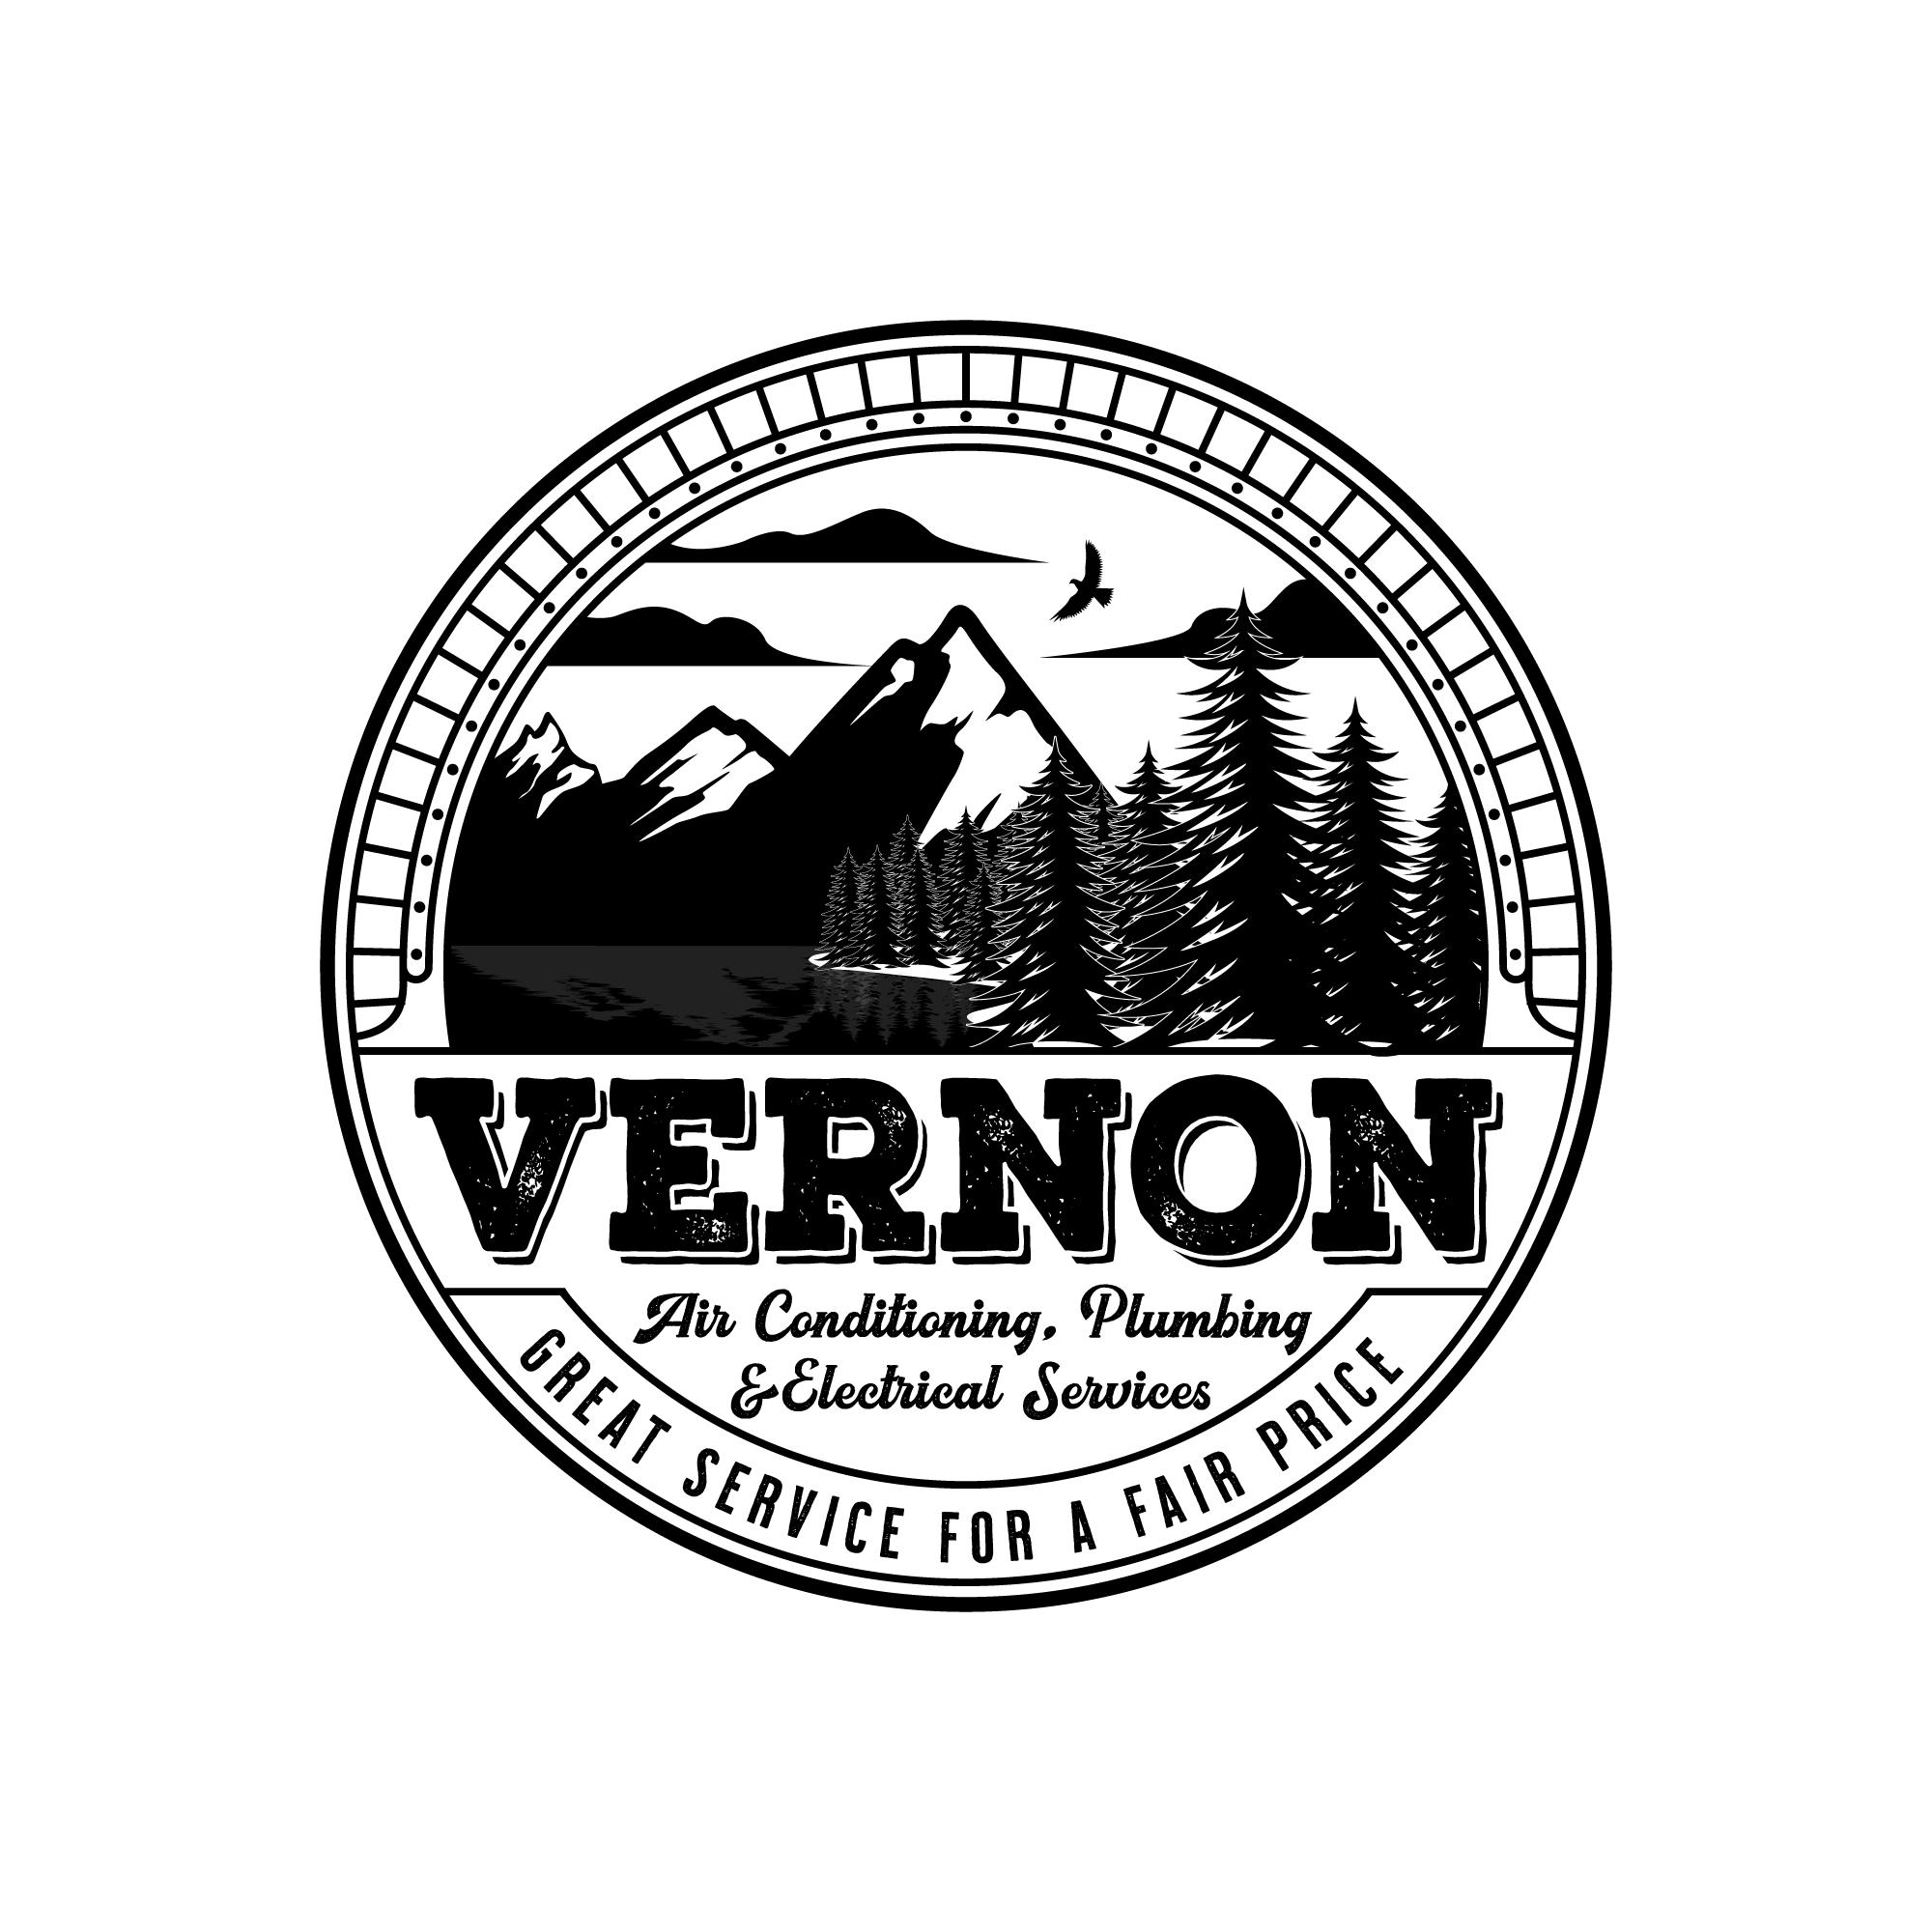 Vernon Air Conditioning, Plumbing & Electrical Services Sheds Light on the Significance of Professional AC Repair